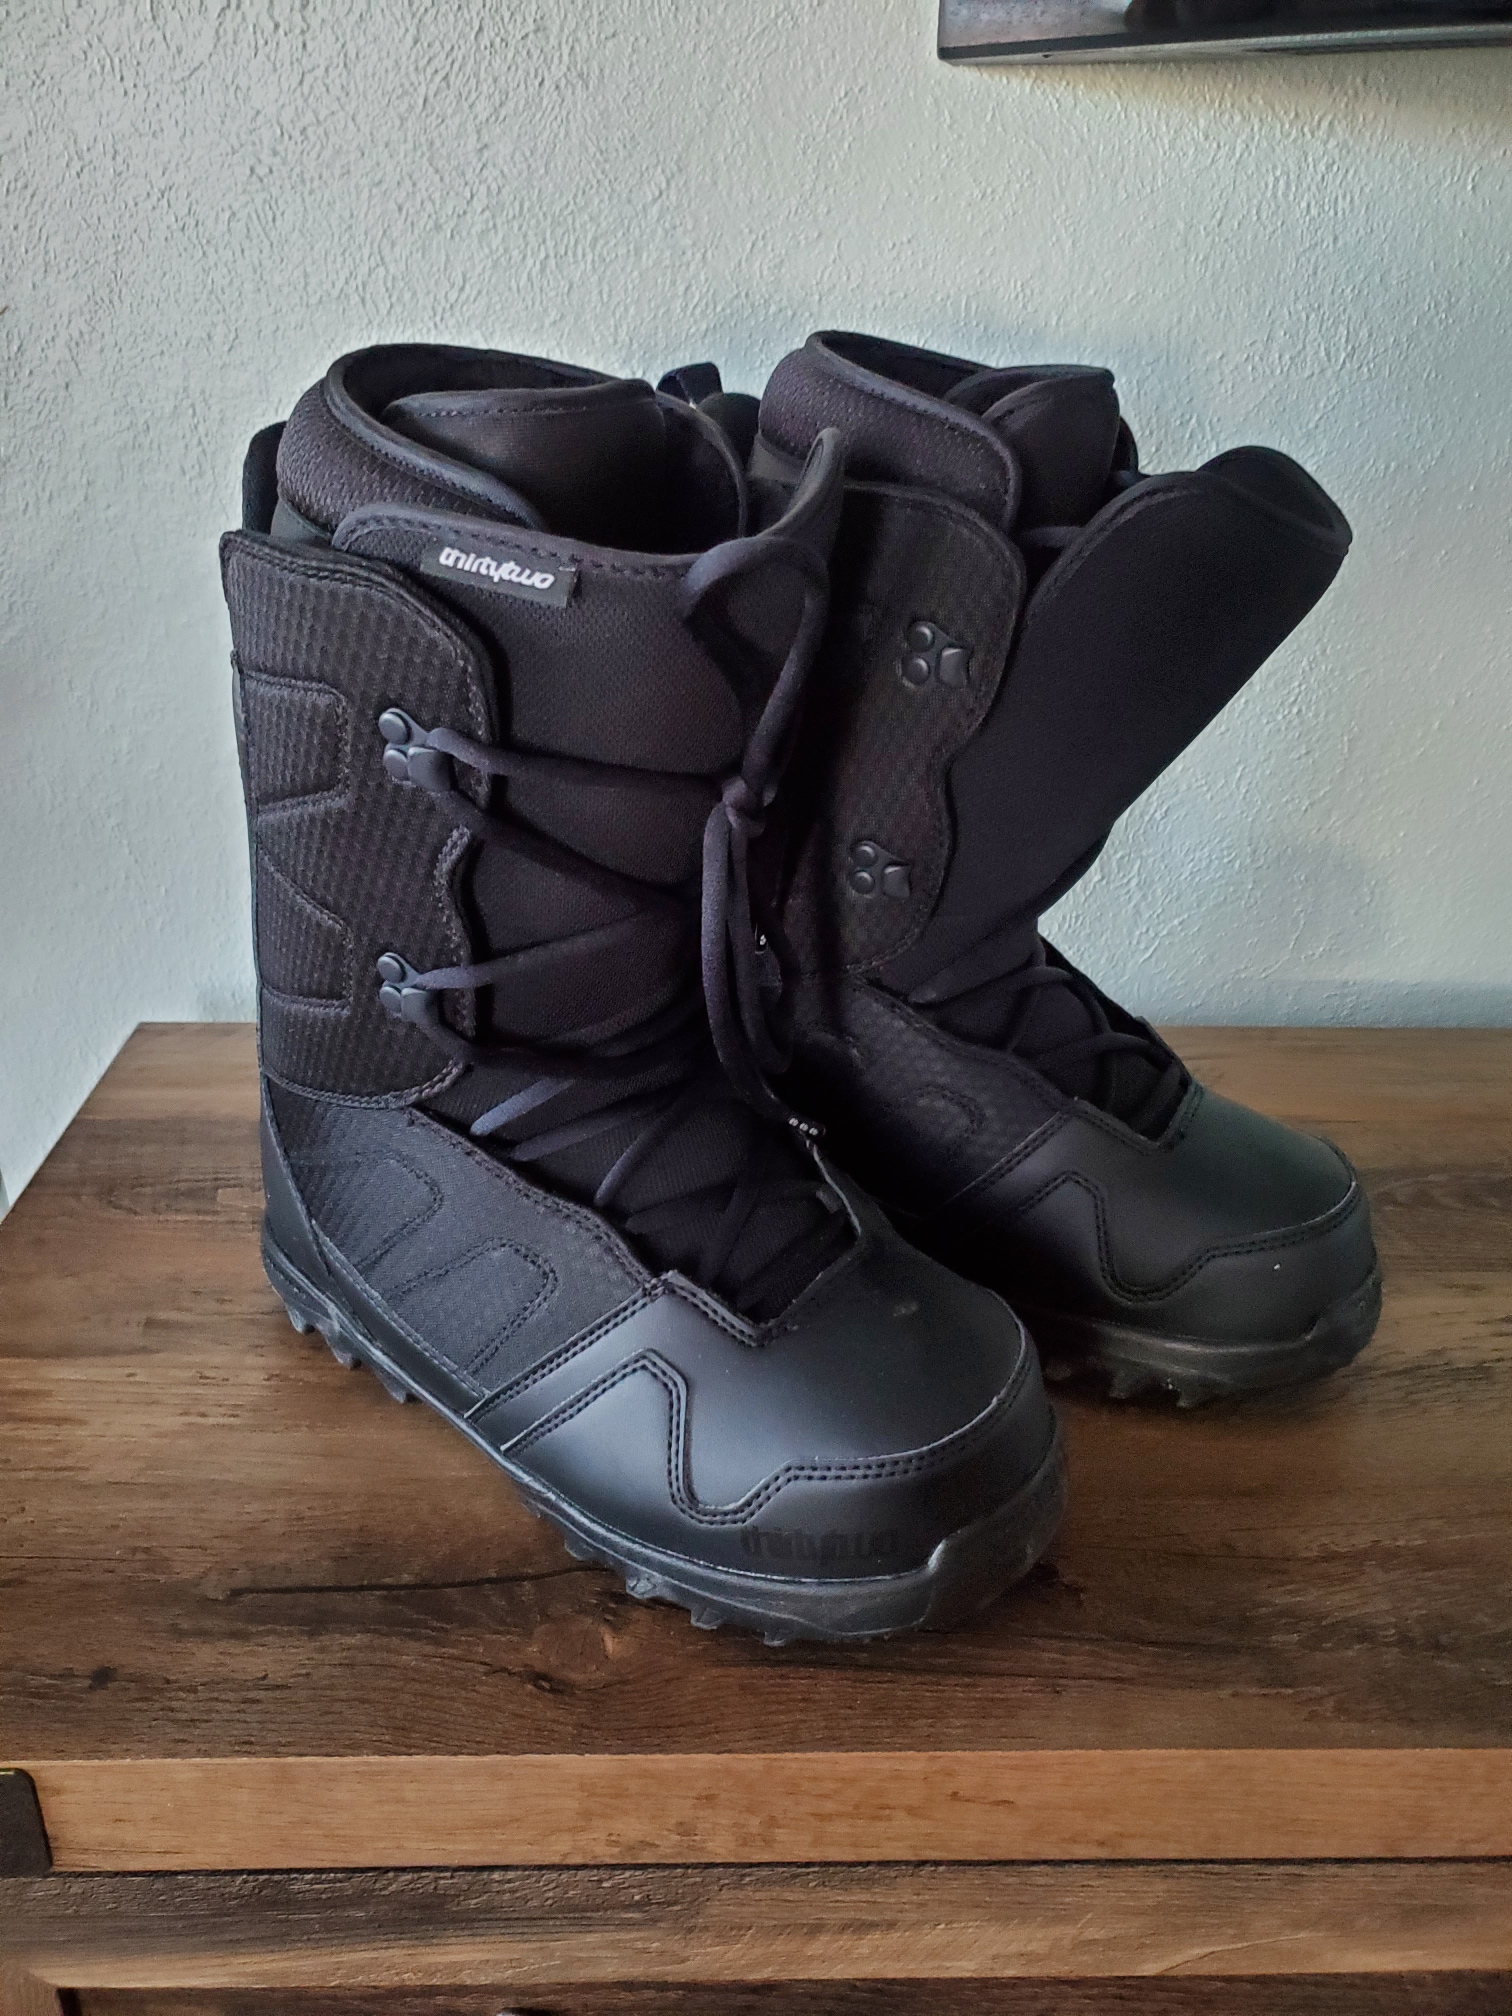 Used Once! Women's Size 9.0 Thirty Two Exit Snowboard Boots